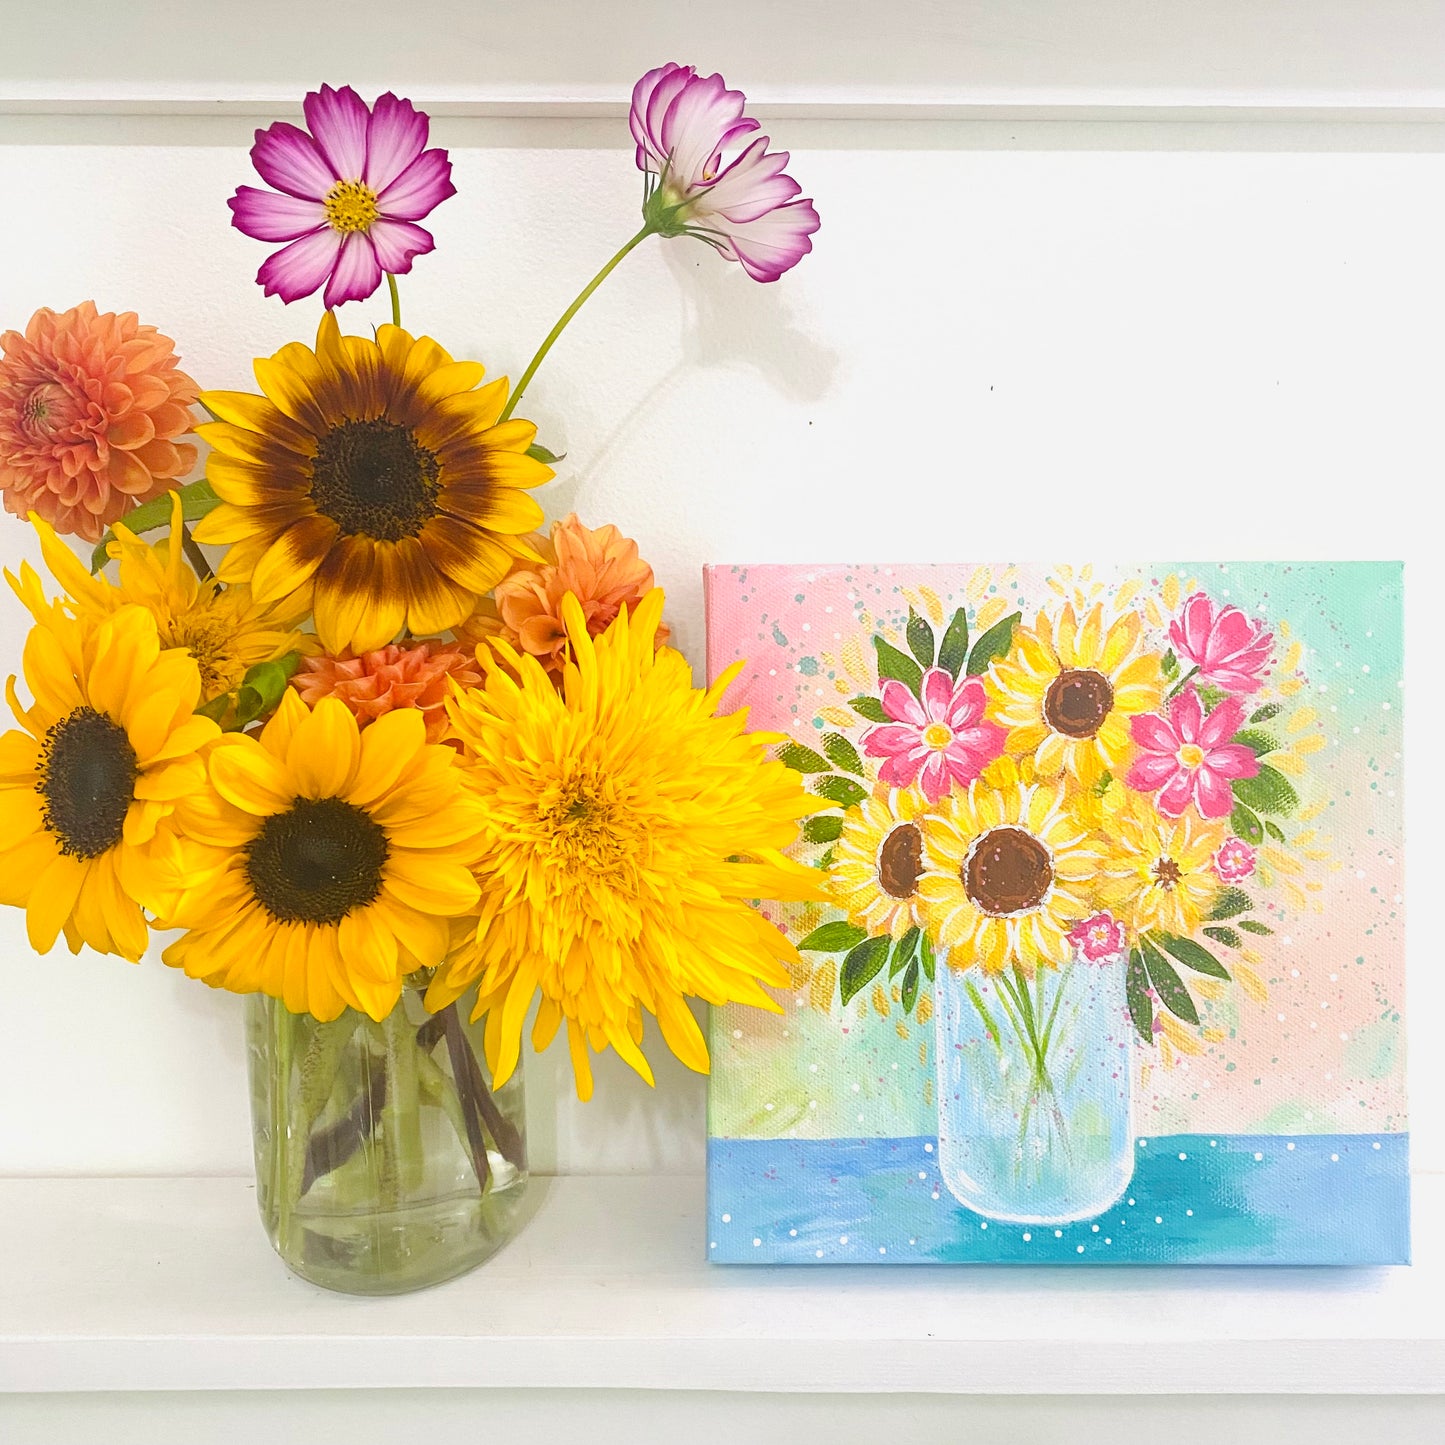 “Sunflower Bouquet” 8x8 inch original floral painting on canvas